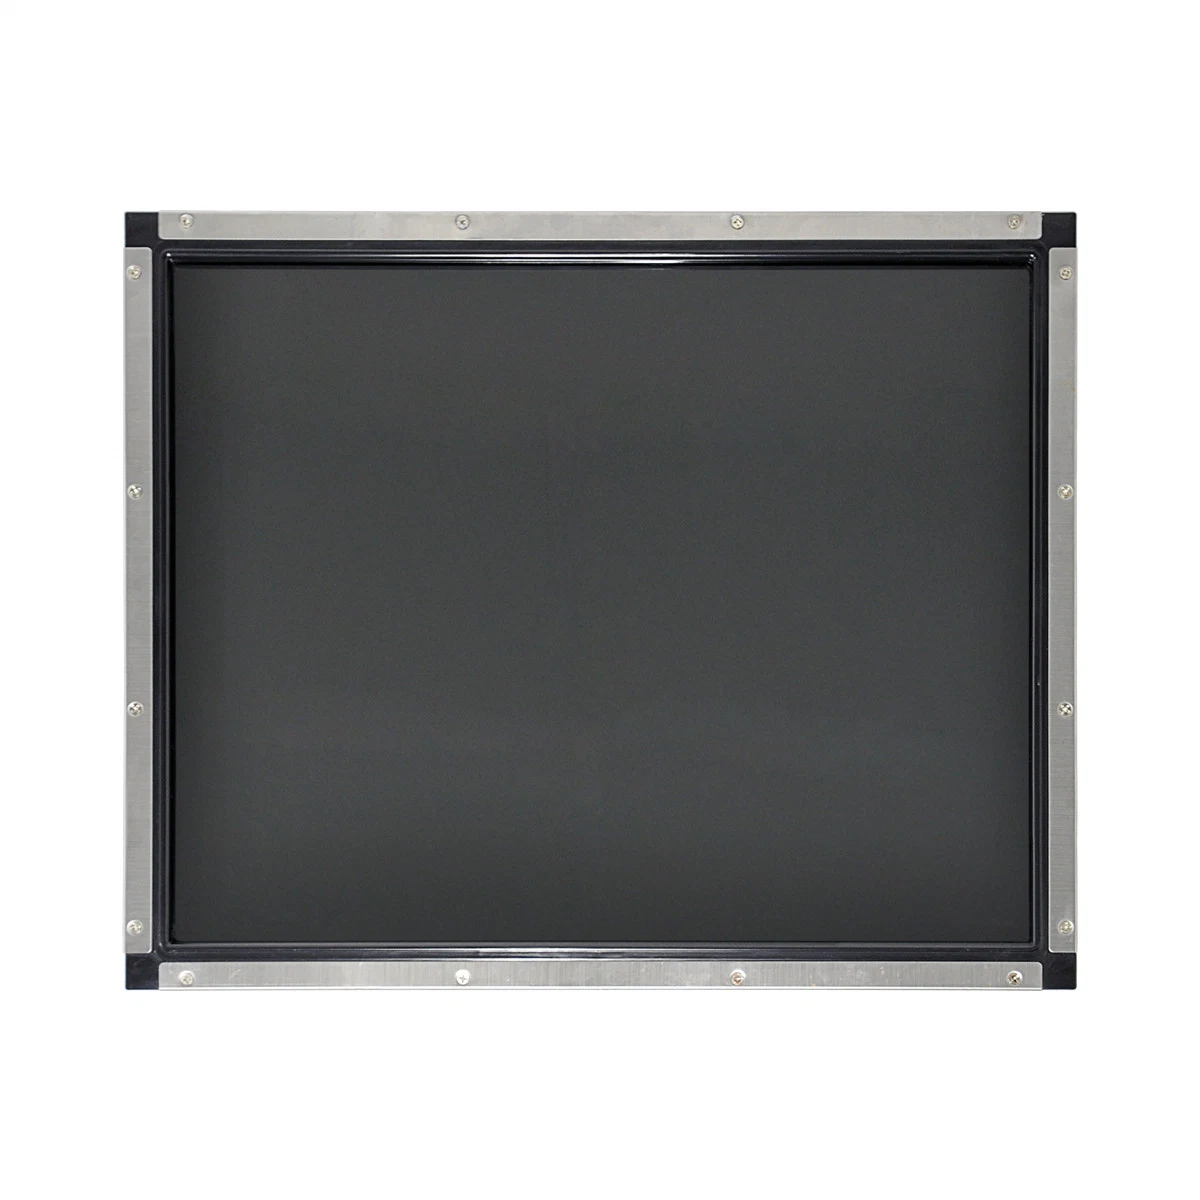 Waterproof Open Frame 17 Inch 17" LCD Display Compatible Elo Et1739L Multi IR Infrared Touch Screen Kiosk Monitor